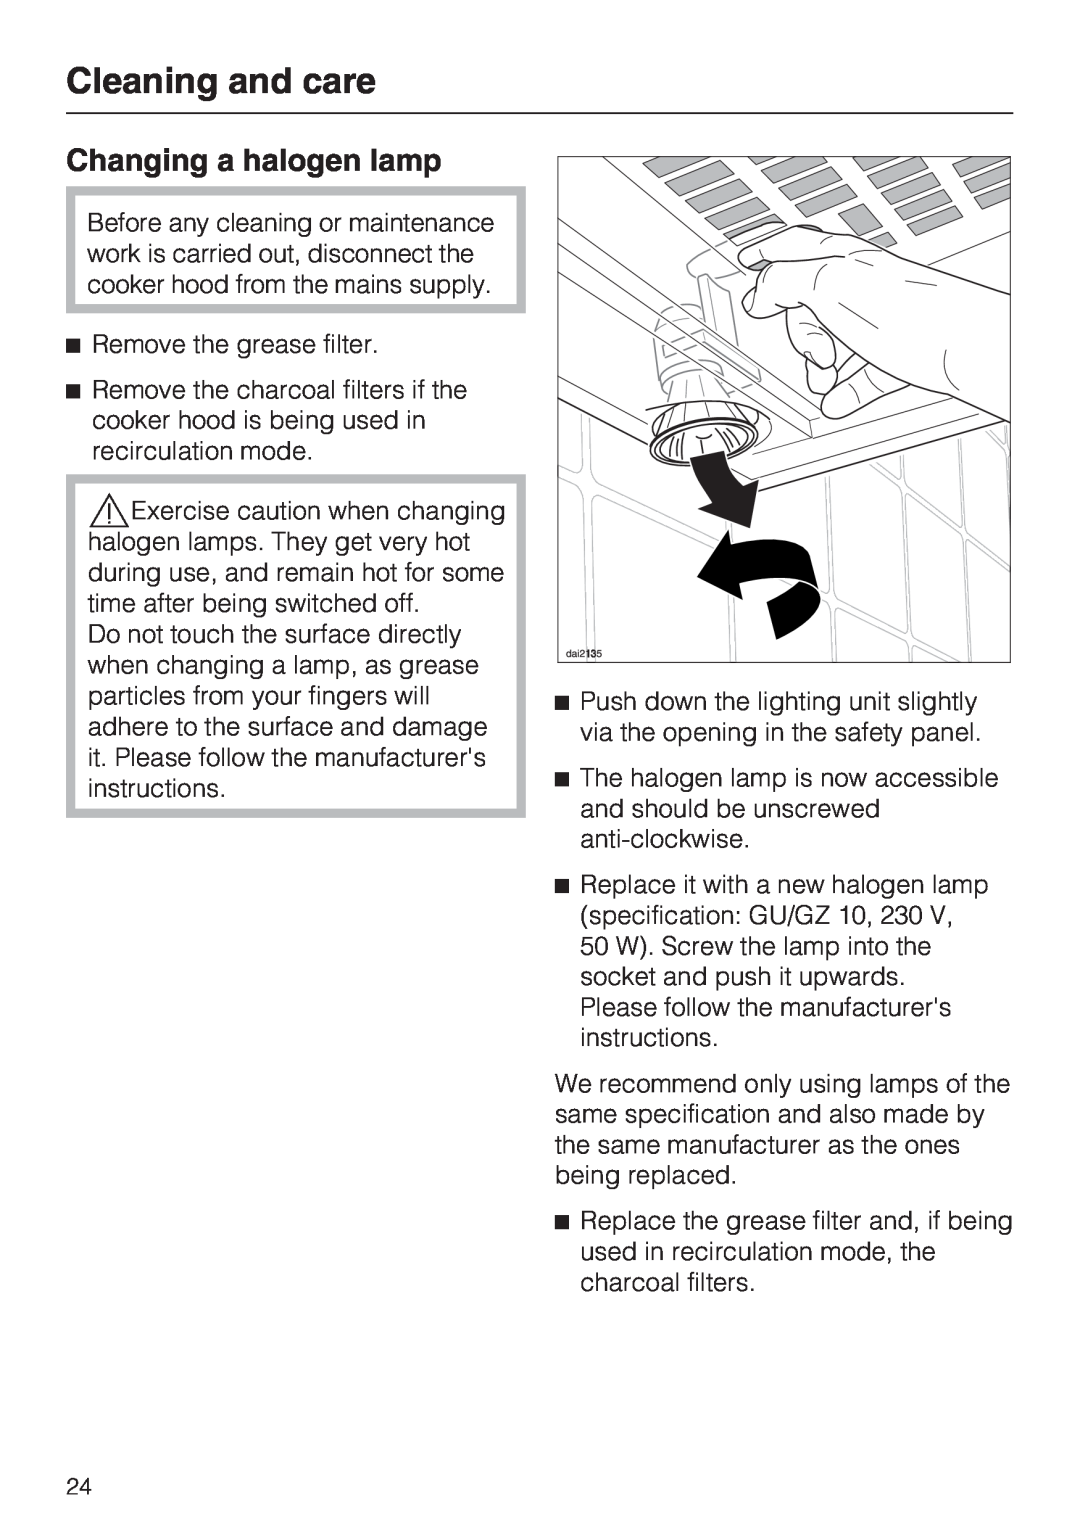 Miele DA 2270 EXT, DA 2210, DA 2250 EXT installation instructions Changing a halogen lamp, Cleaning and care 